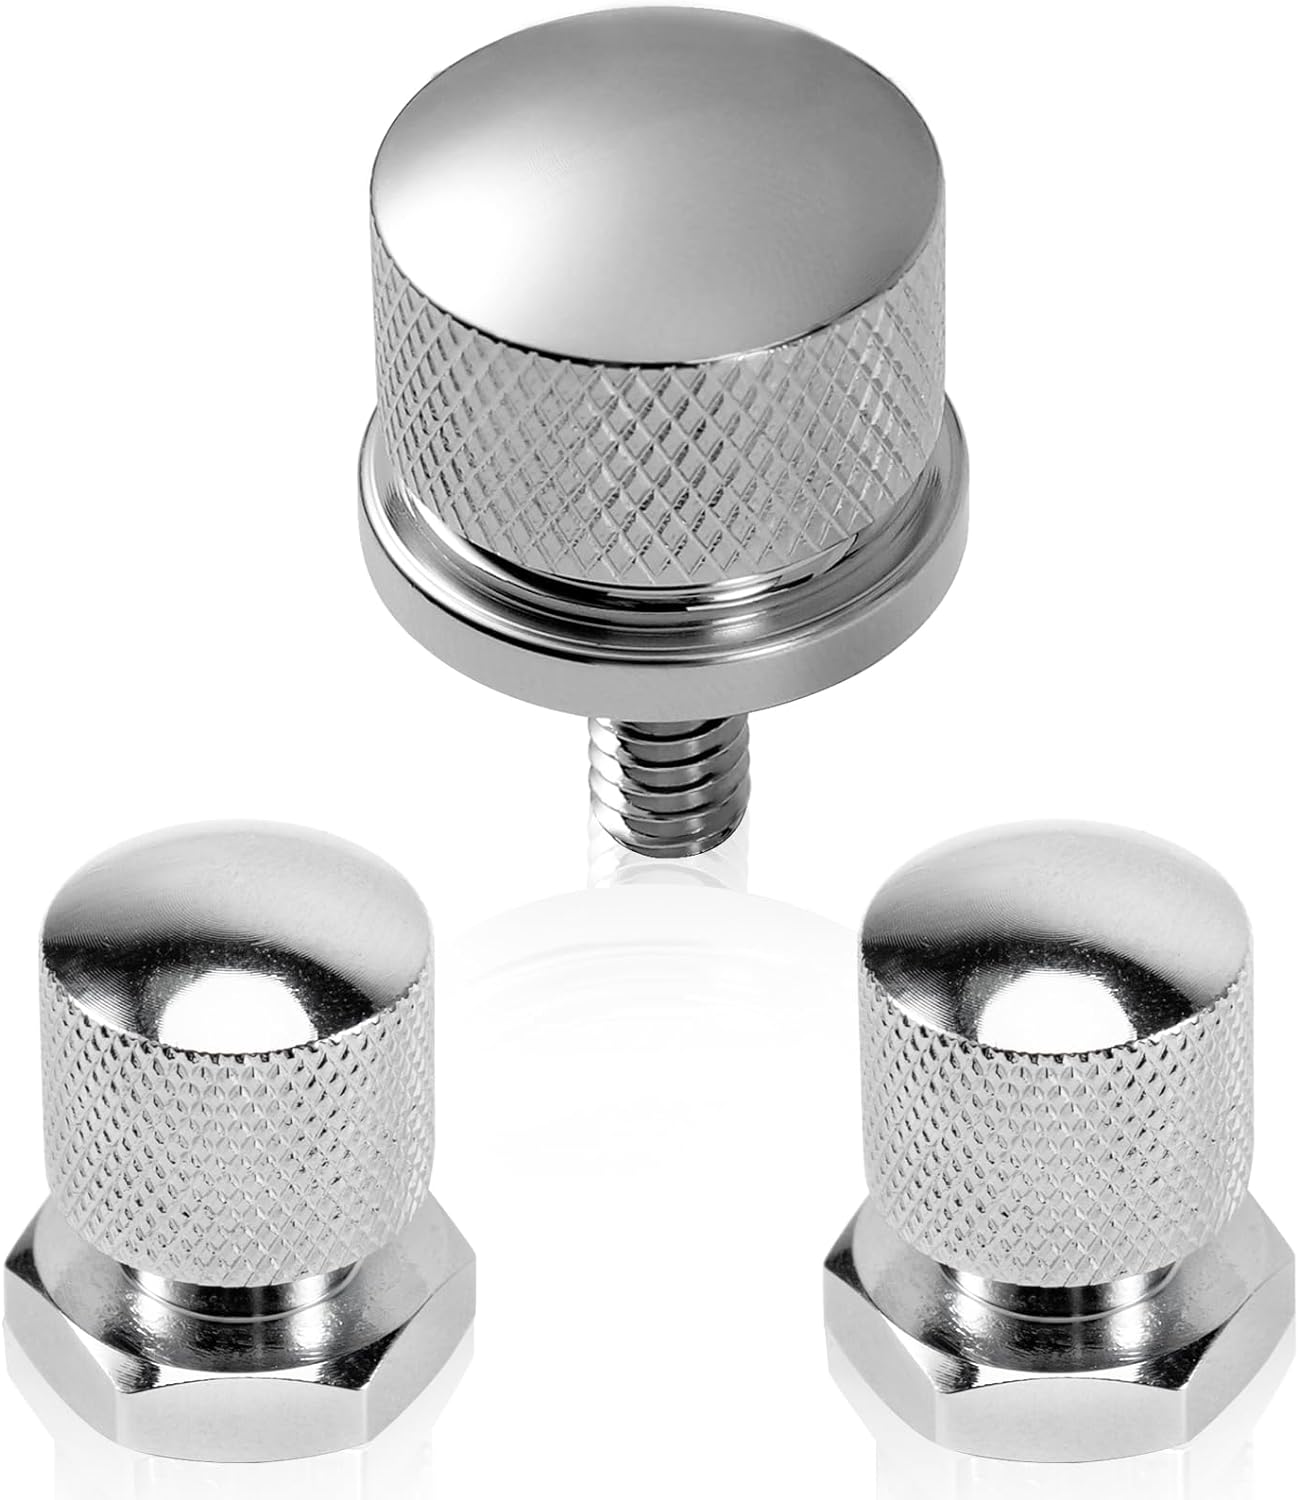 Eumti 3PCS Stainless Knurled Fender Rear Seat Bolt Screw with Solo seat mounting nut 1/4-20 Thread Skull Pattern Black Eyes Chrome Fit Harley Davidson All Touring Softail Models 1999-Later - Eumti Rear Seat Bolt Screw Review